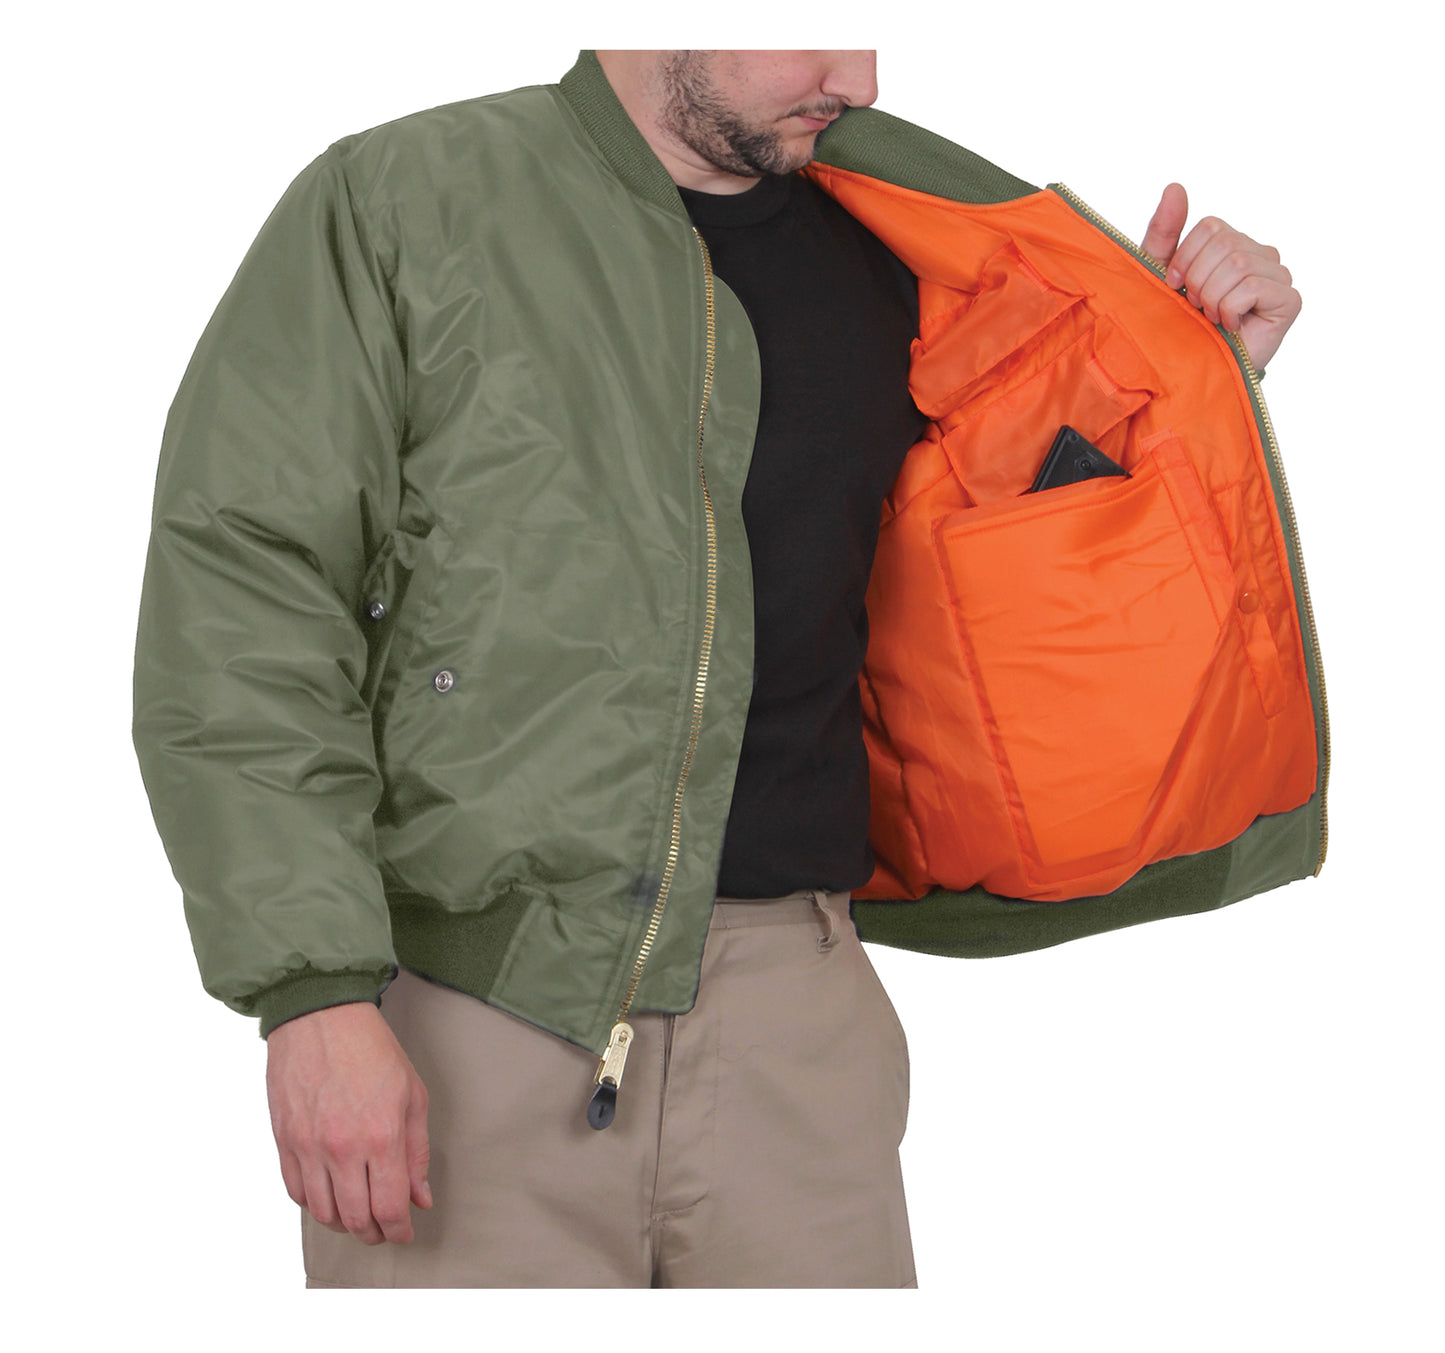 Rothco Concealed Carry MA-1 Flight Jacket - Sage Green